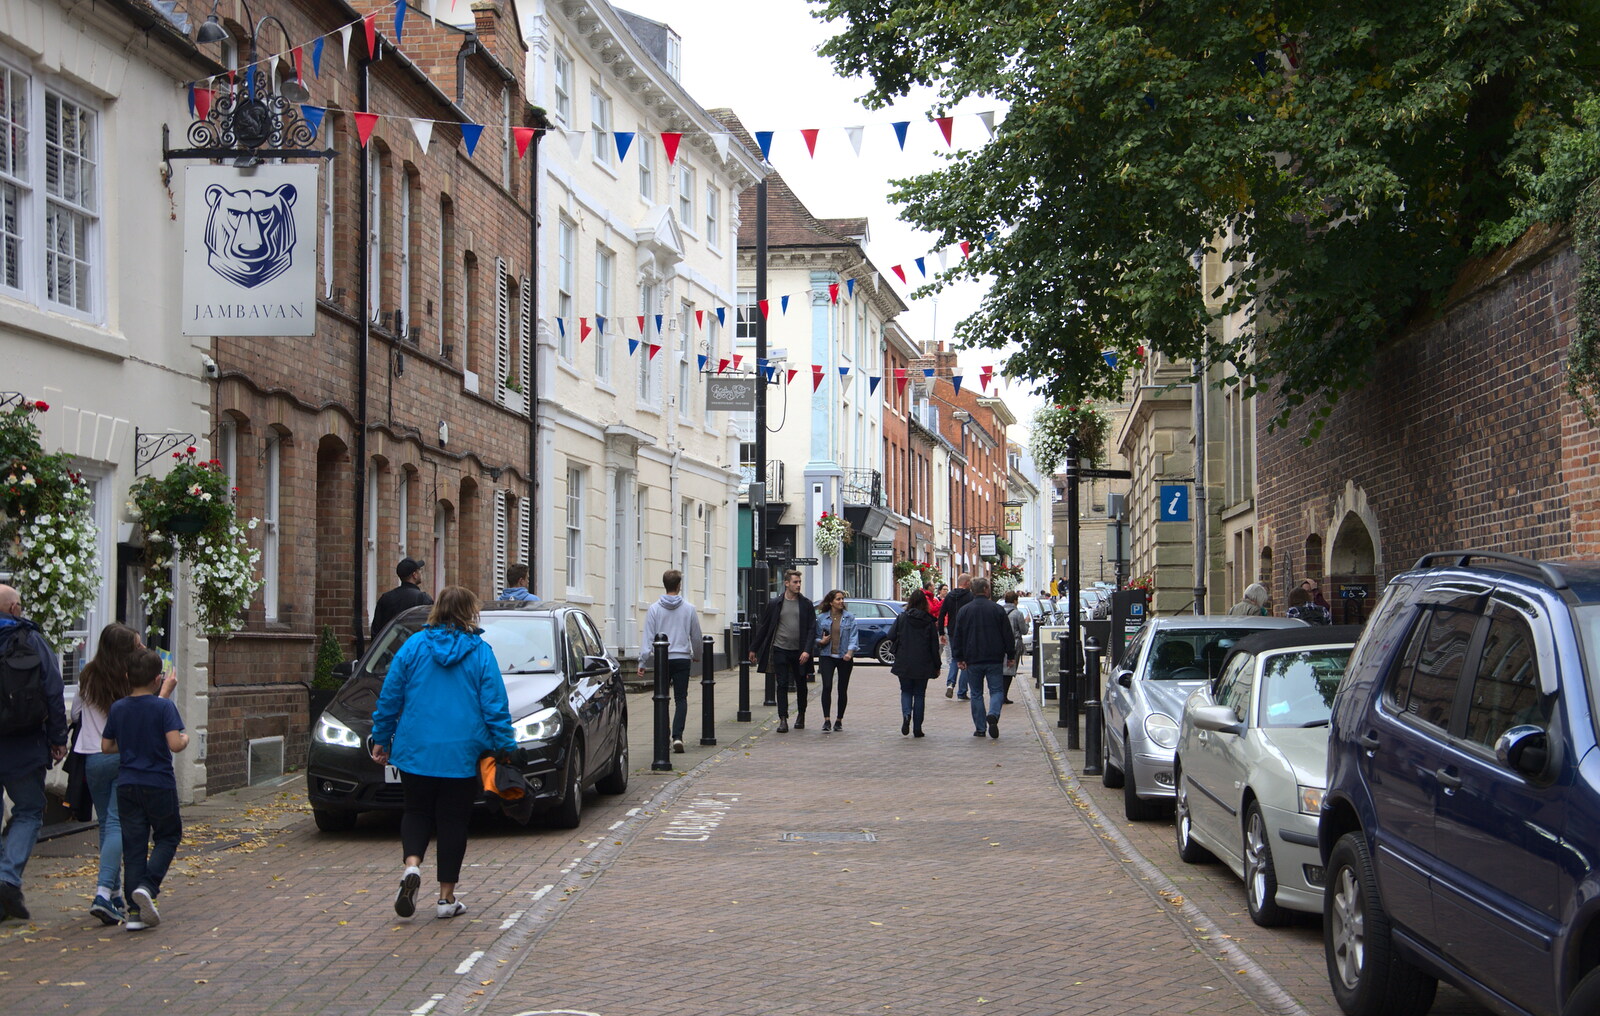 The streets of Warwick from A Day at Warwick Castle, Warwickshire - 8th September 2018